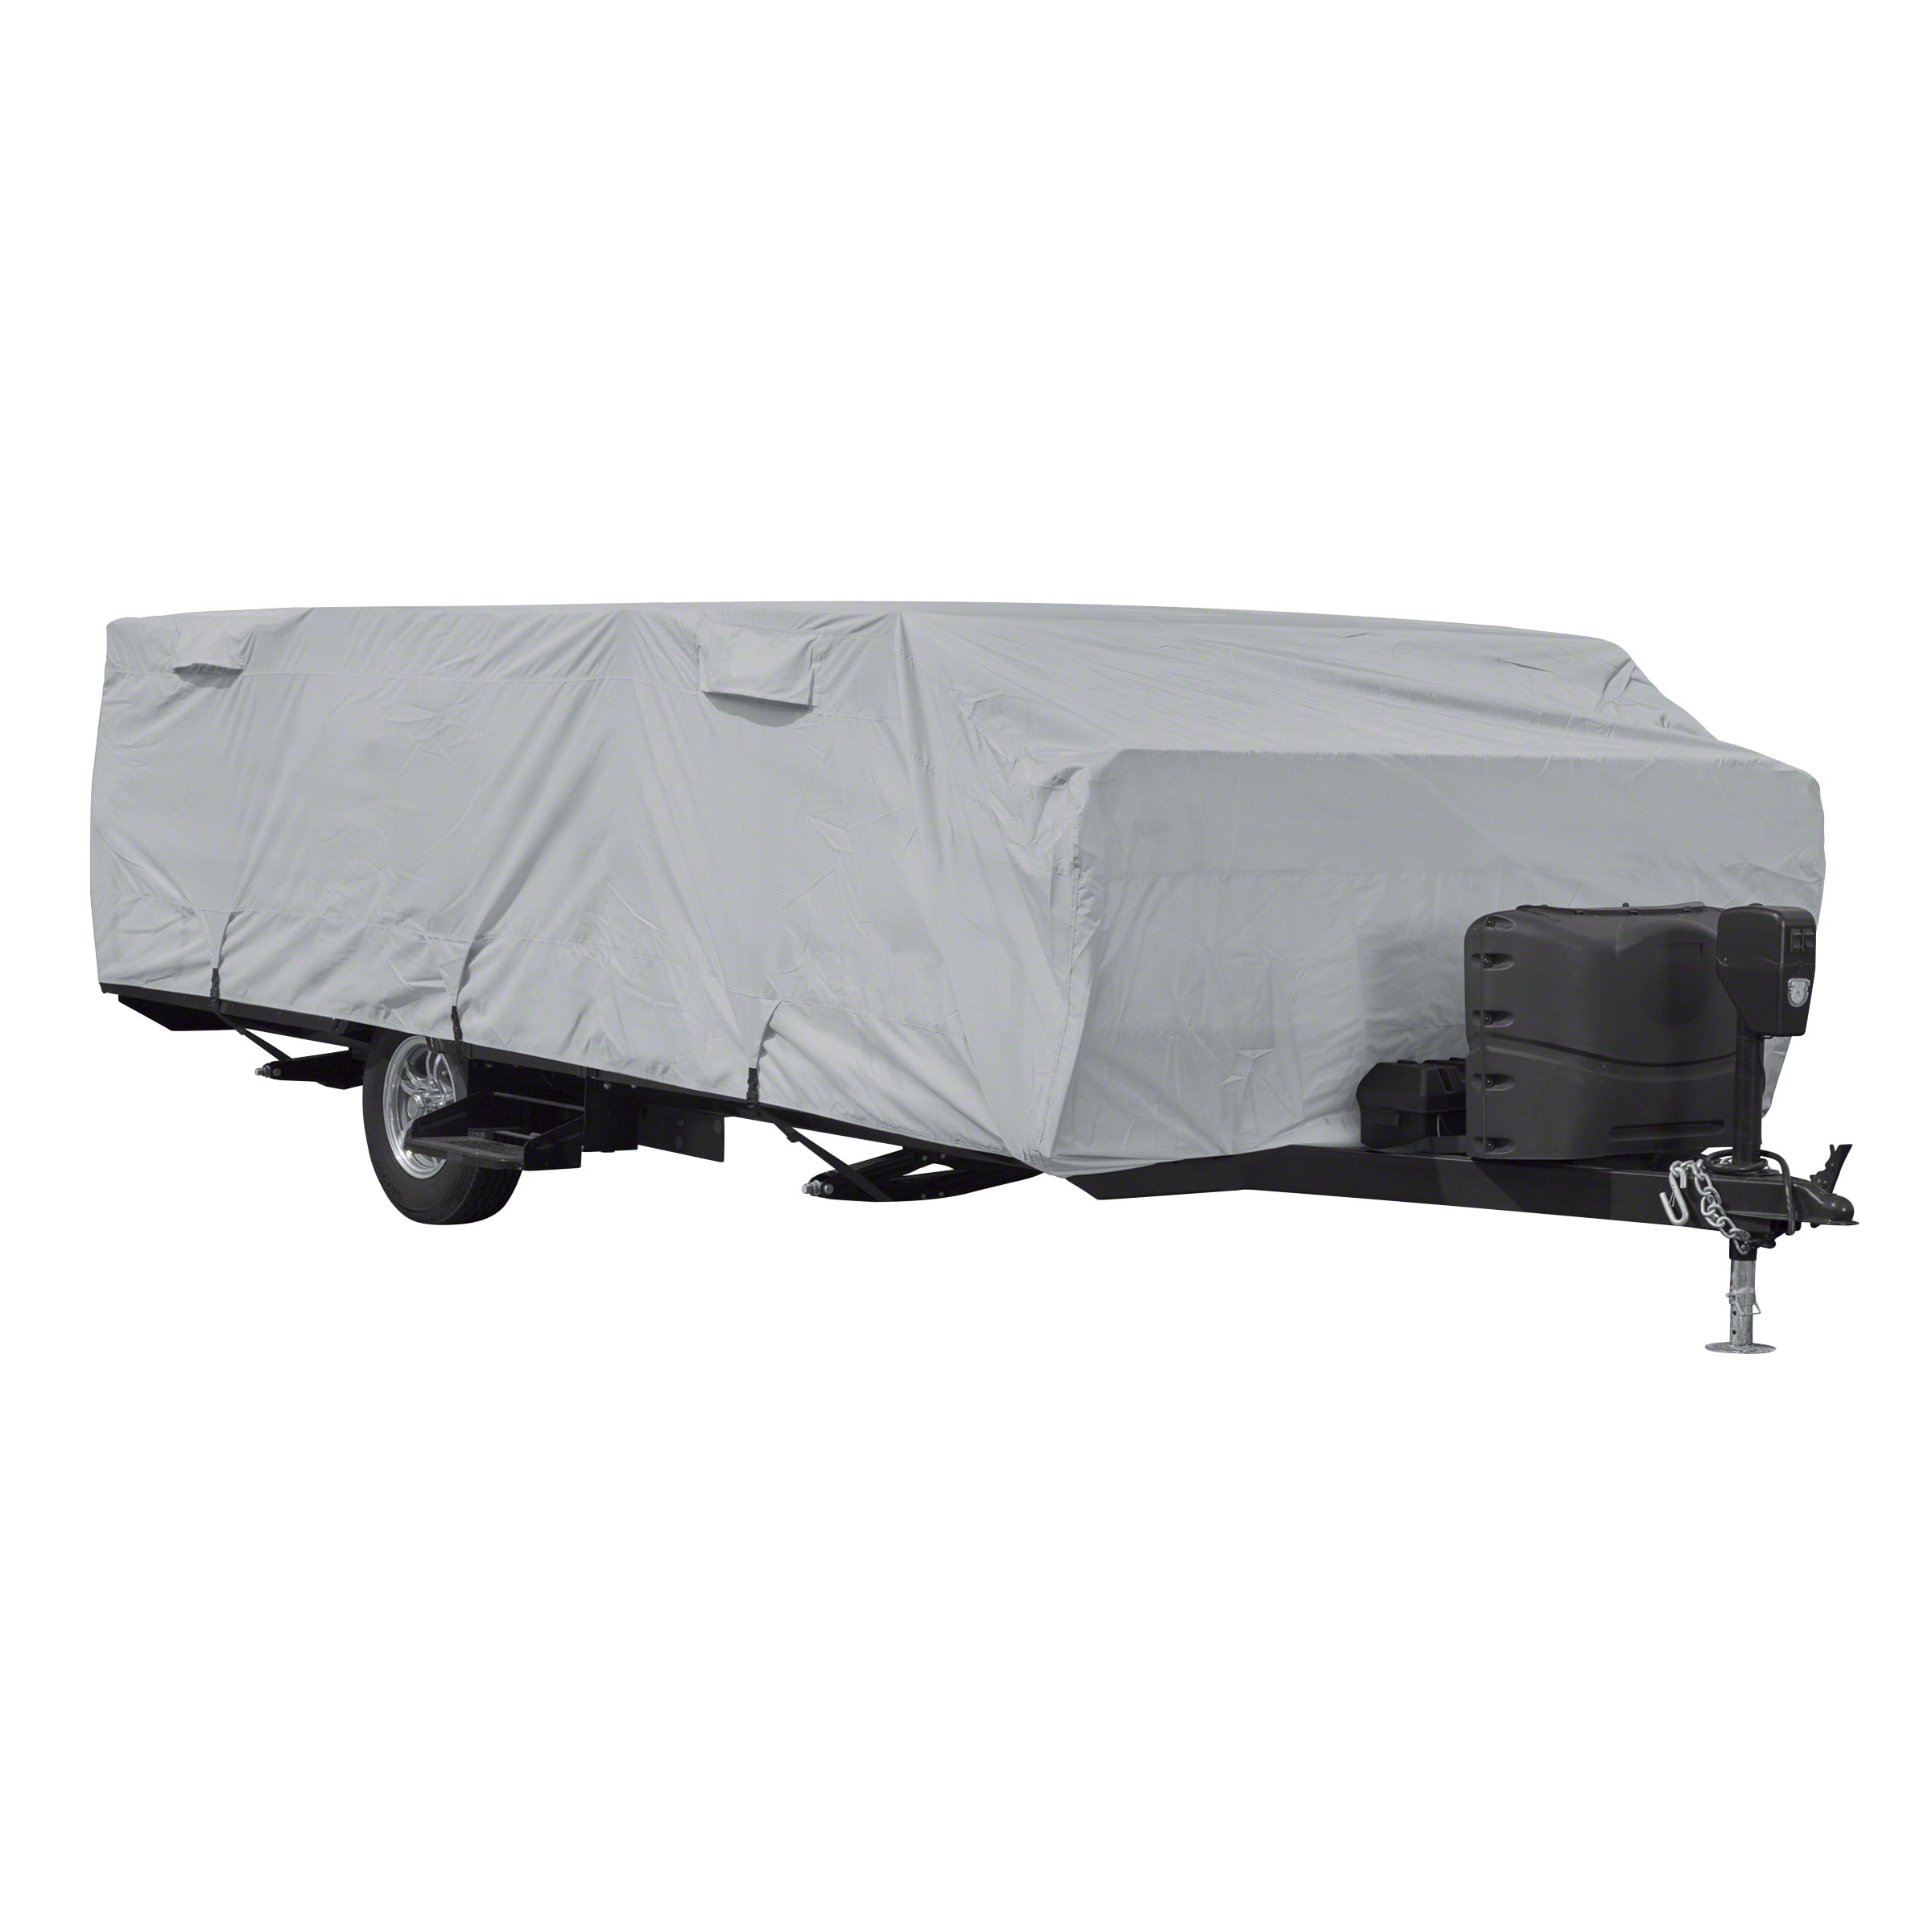 fits 14-16 Long Trailers 204L x 85W x 42H Expedition Pop Up Camper Covers by Eevelle 